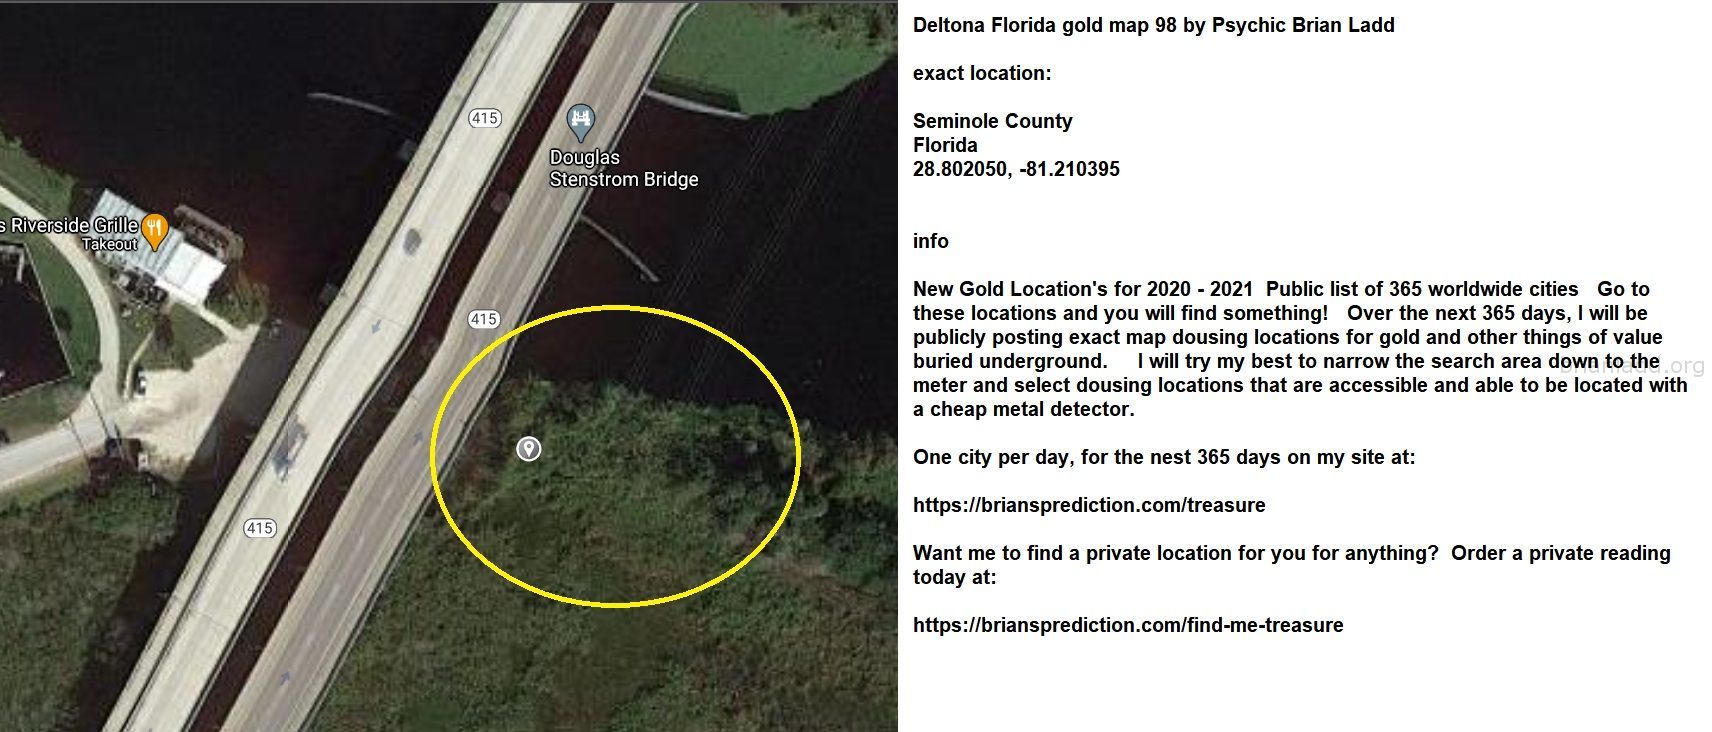 Deltona Florida Gold Map 98 By Psychic Brian Ladd - Deltona Florida Gold Map 98 By Psychic Brian Ladd  Exact Location:  ...
Deltona Florida Gold Map 98 By Psychic Brian Ladd  Exact Location:  Seminole County  Florida  28.802050, -81.210395  Info  New Gold Location'S For 2020 - 2021  Public List Of 365 Worldwide Cities  Go To These Locations And You Will Find Something!  Over The Next 365 Days, I Will Be Publicly Posting Exact Map Dousing Locations For Gold And Other Things Of Value Buried Underground.  I Will Try My Best To Narrow The Search Area Down To The Meter And Select Dousing Locations That Are Accessible And Able To Be Located With A Cheap Metal Detector.  One City Per Day, For The Nest 365 Days On My Site At:   https://briansprediction.com/Treasure  Want Me To Find A Private Location For You For Anything?  Order A Private Reading Today At:   https://briansprediction.com/Find-Me-Treasure
